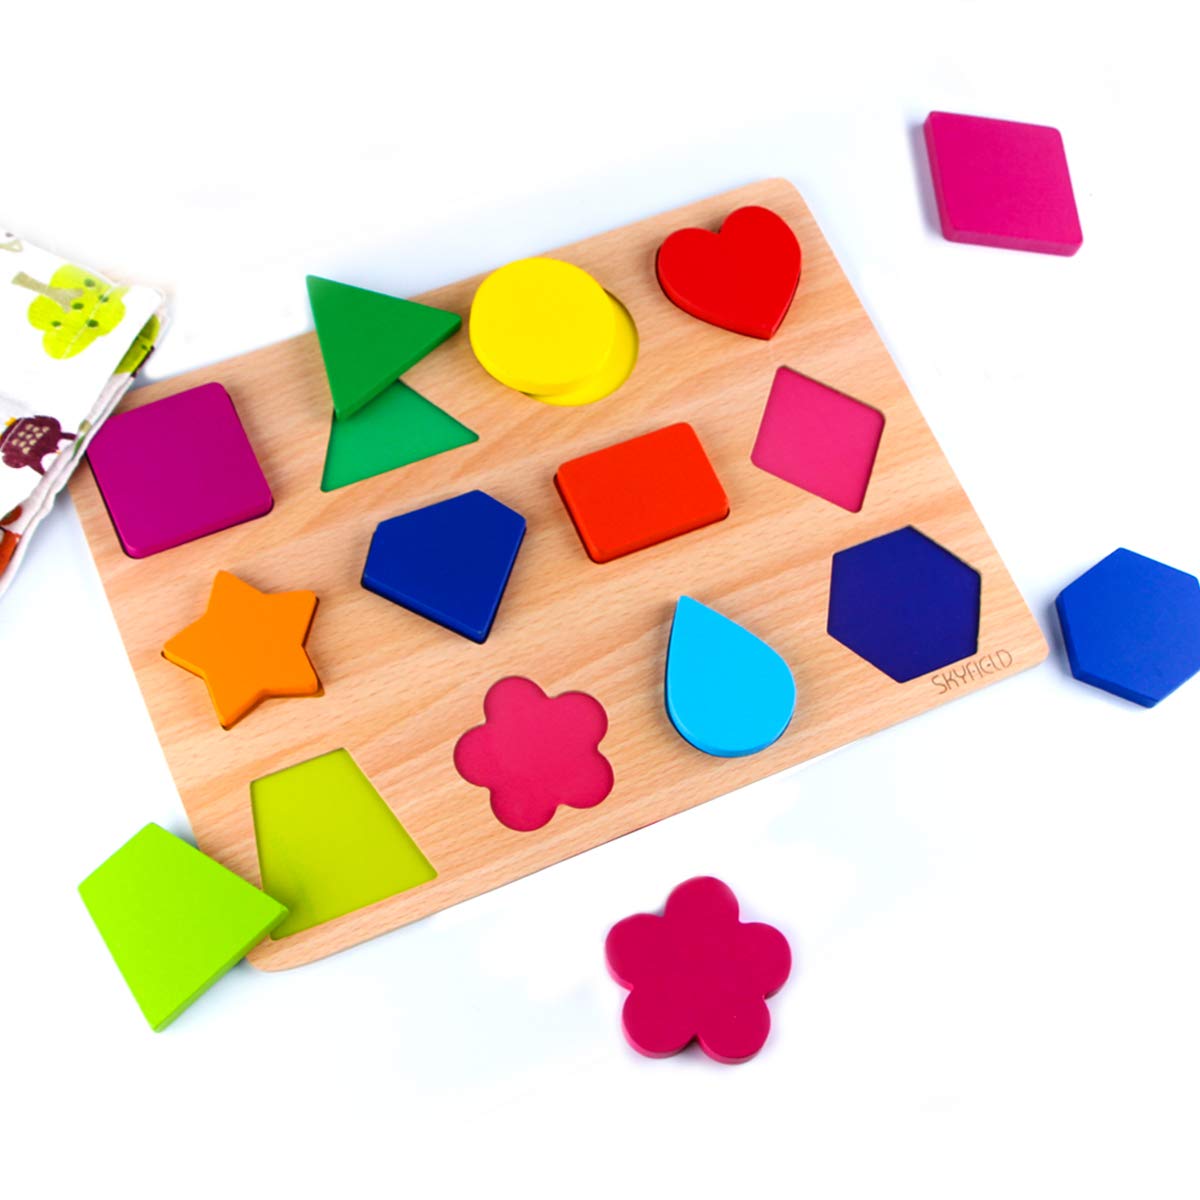 Skyfield Wooden Shape Puzzles, Early Educational Developmental Toy for 2, 3, 4, 5, 6 Years Old Boys and Girls, for Toddlers, Kids, Preschoolers, 13.4